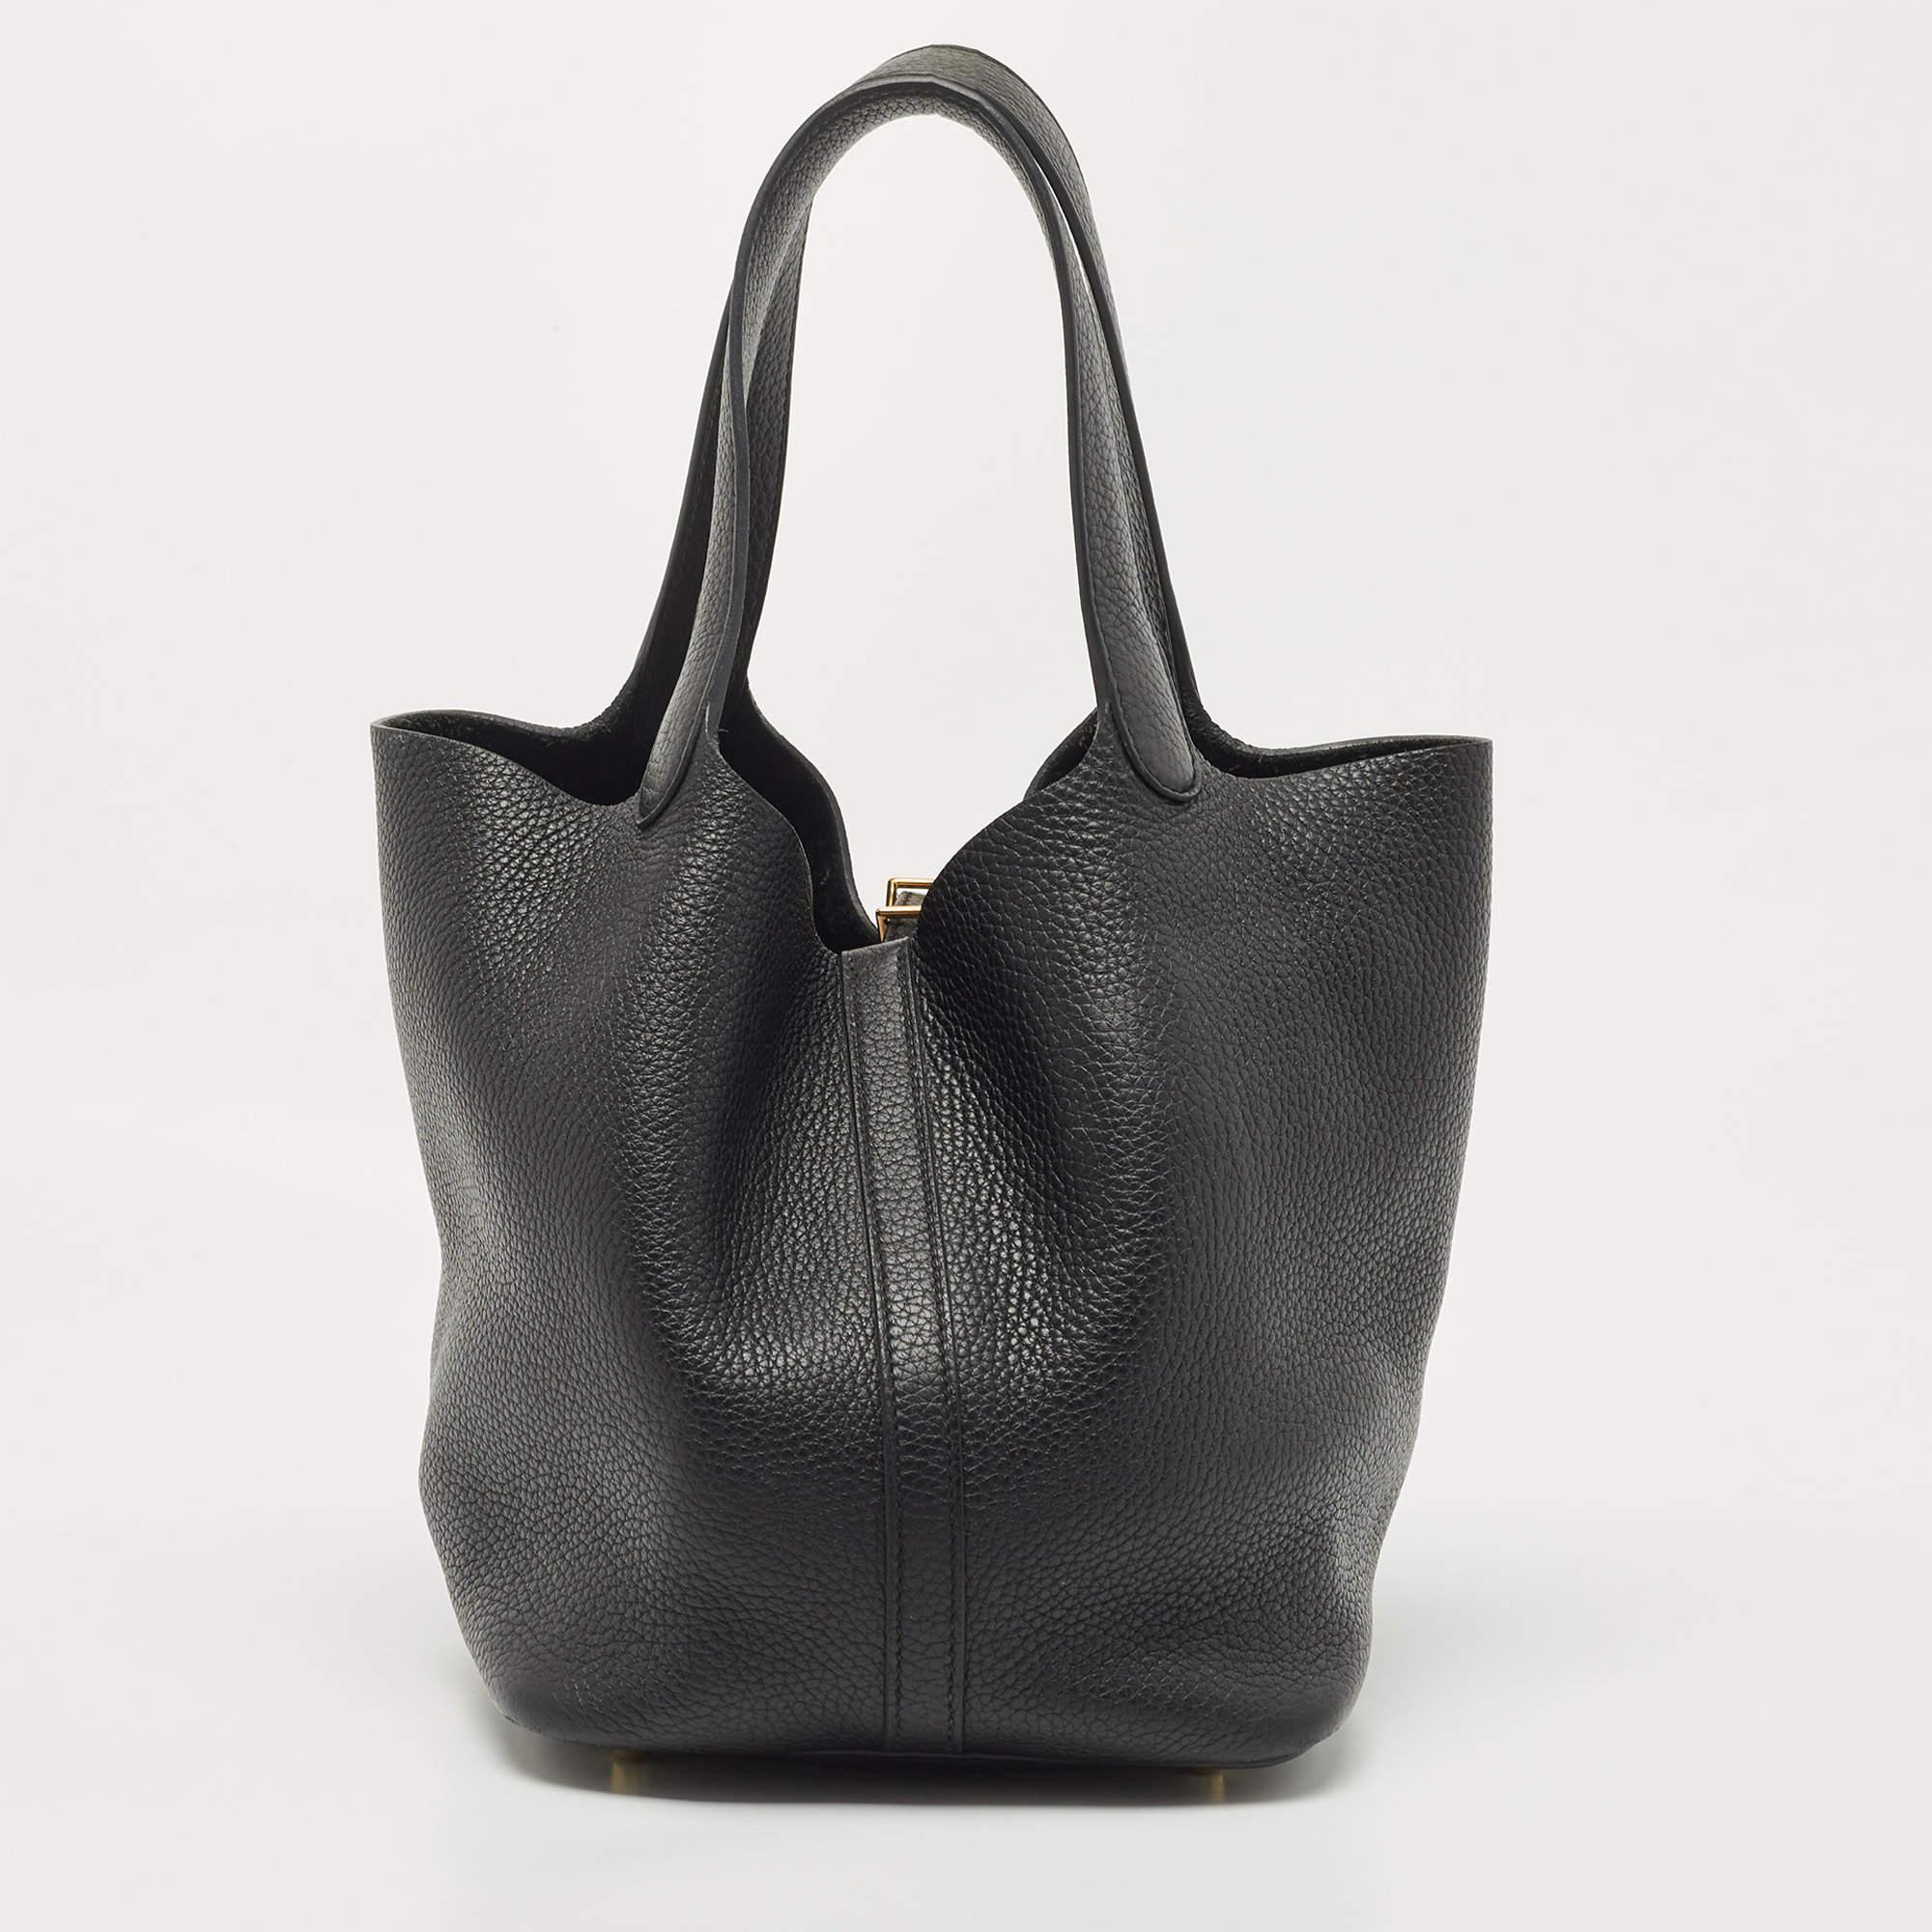 Wonderfully crafted from leather, this Picotin from Hermes is a creation for people who love a perfect blend of luxury and style. It comes in a classy hue, and it sits in a relaxed shape with two handles and a spacious interior. Armed with